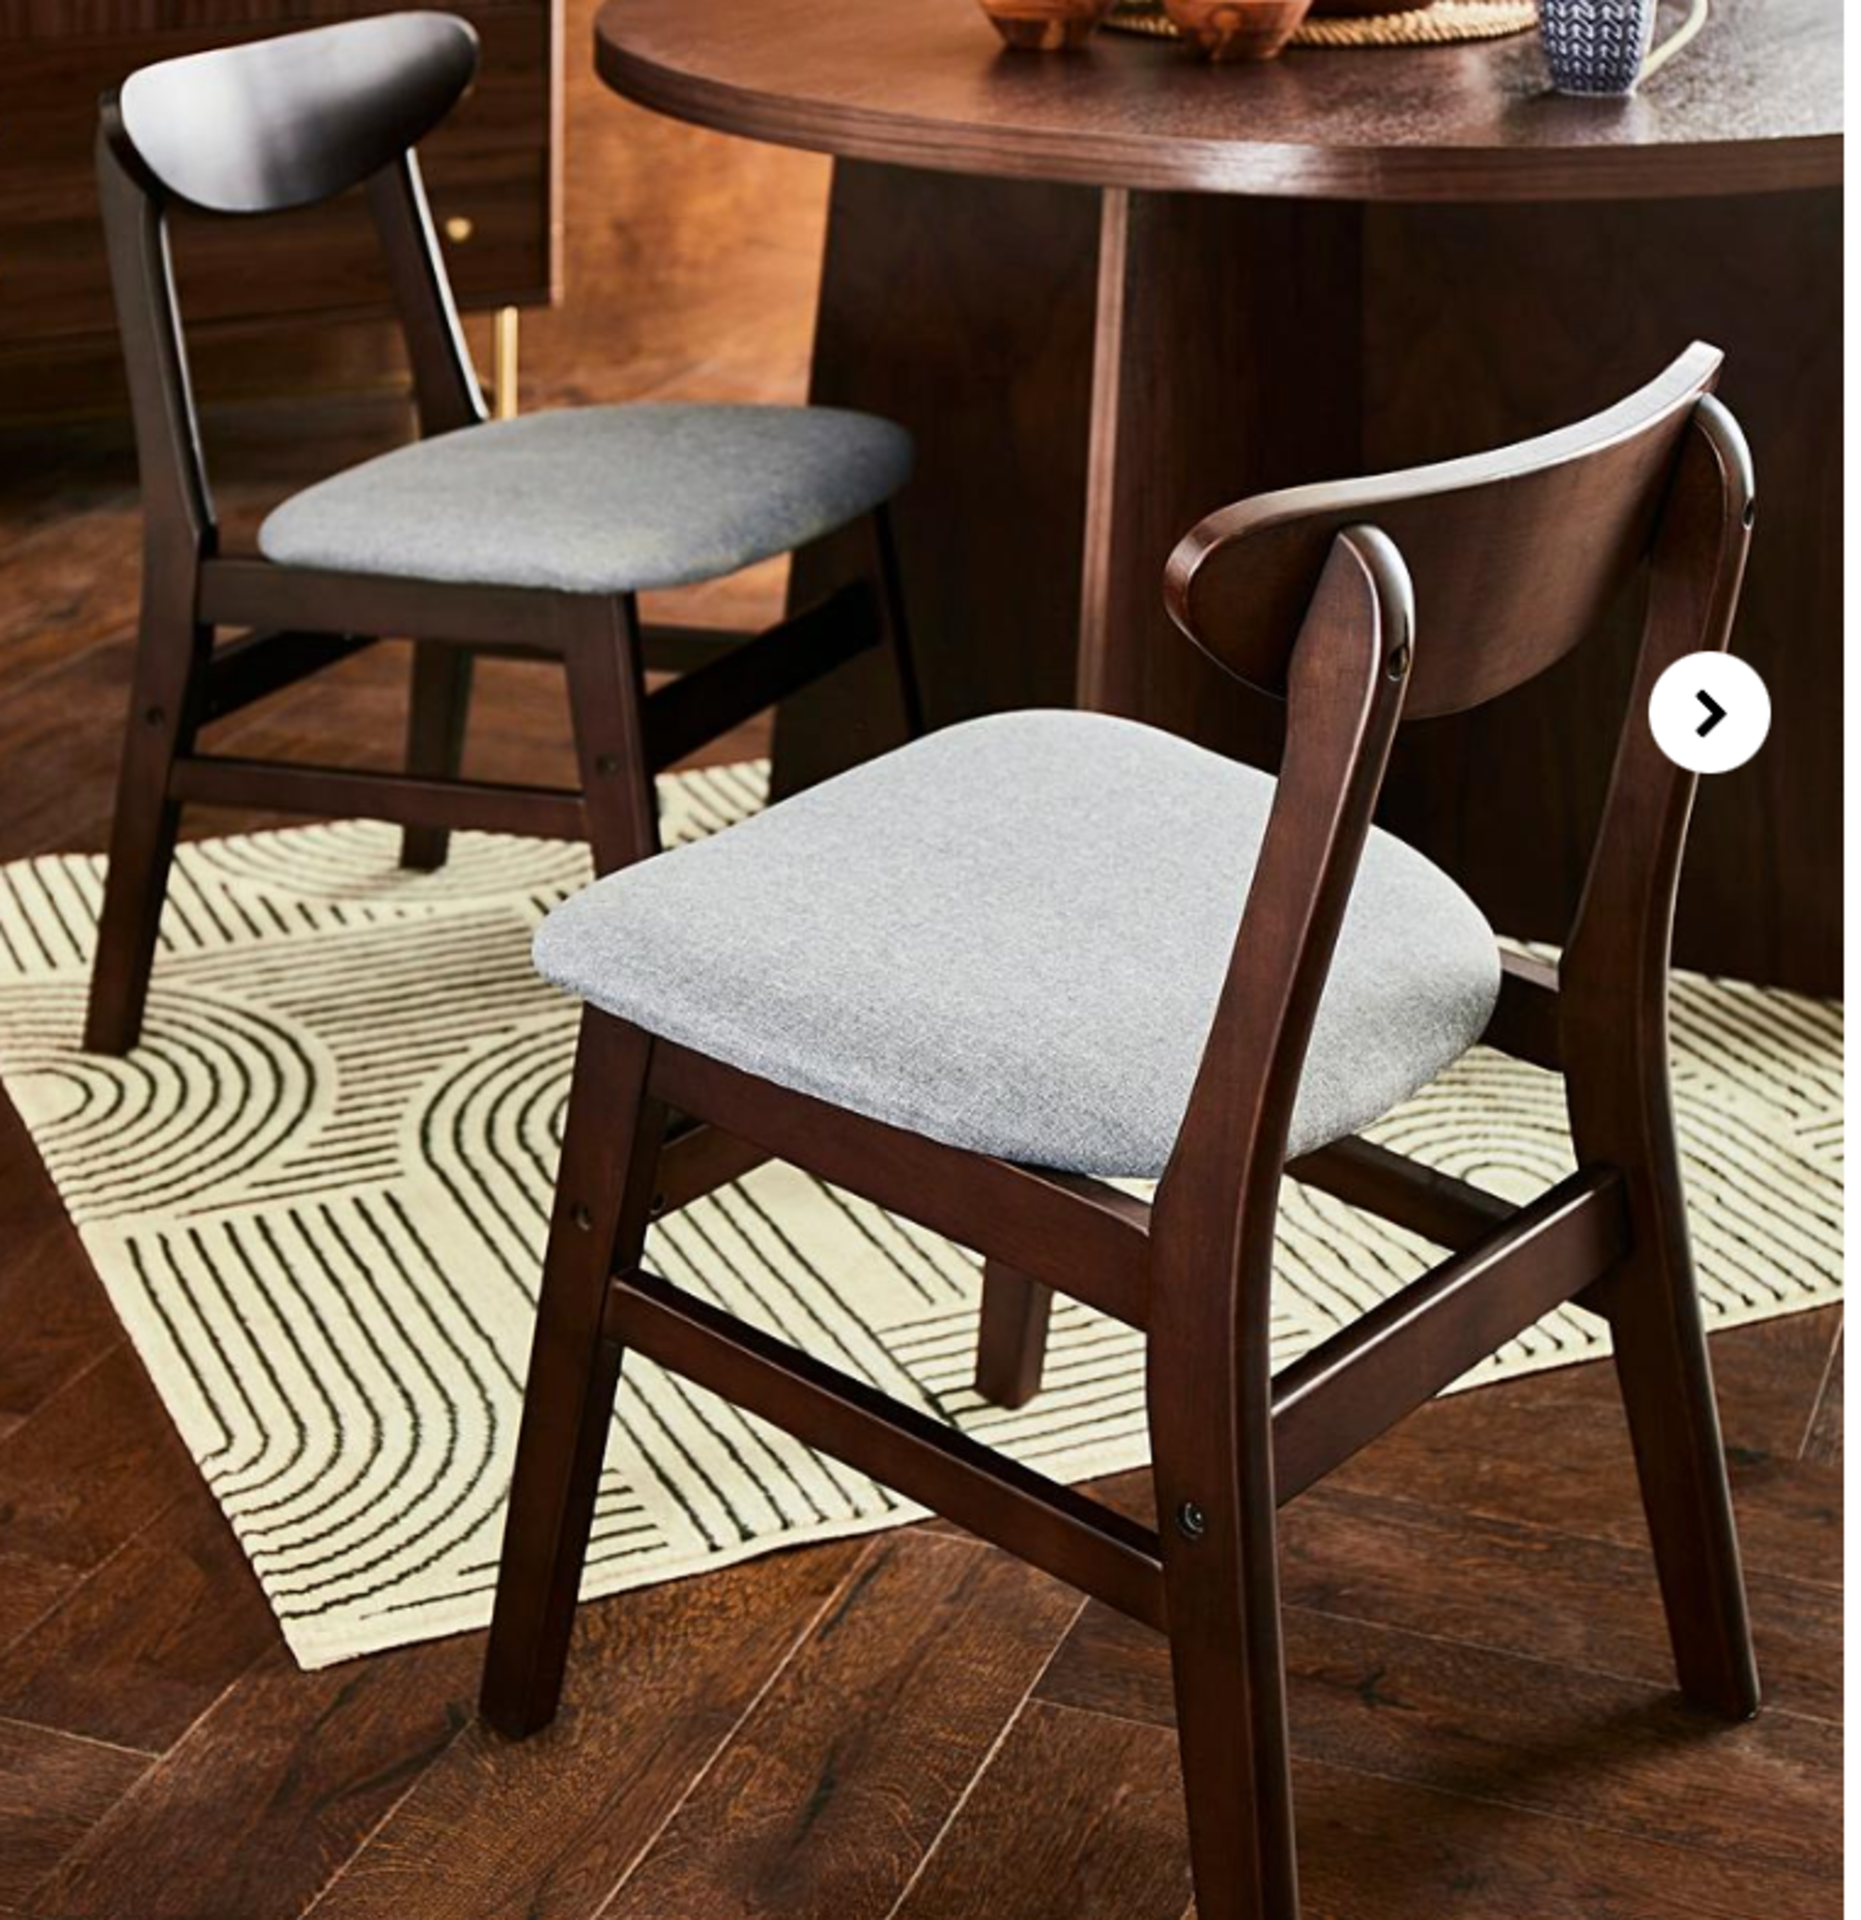 Gray & Osbourn No. 148 Wooden Pair of Dining Chairs. - ER28. Part of the Gray & Osbourn brand, the